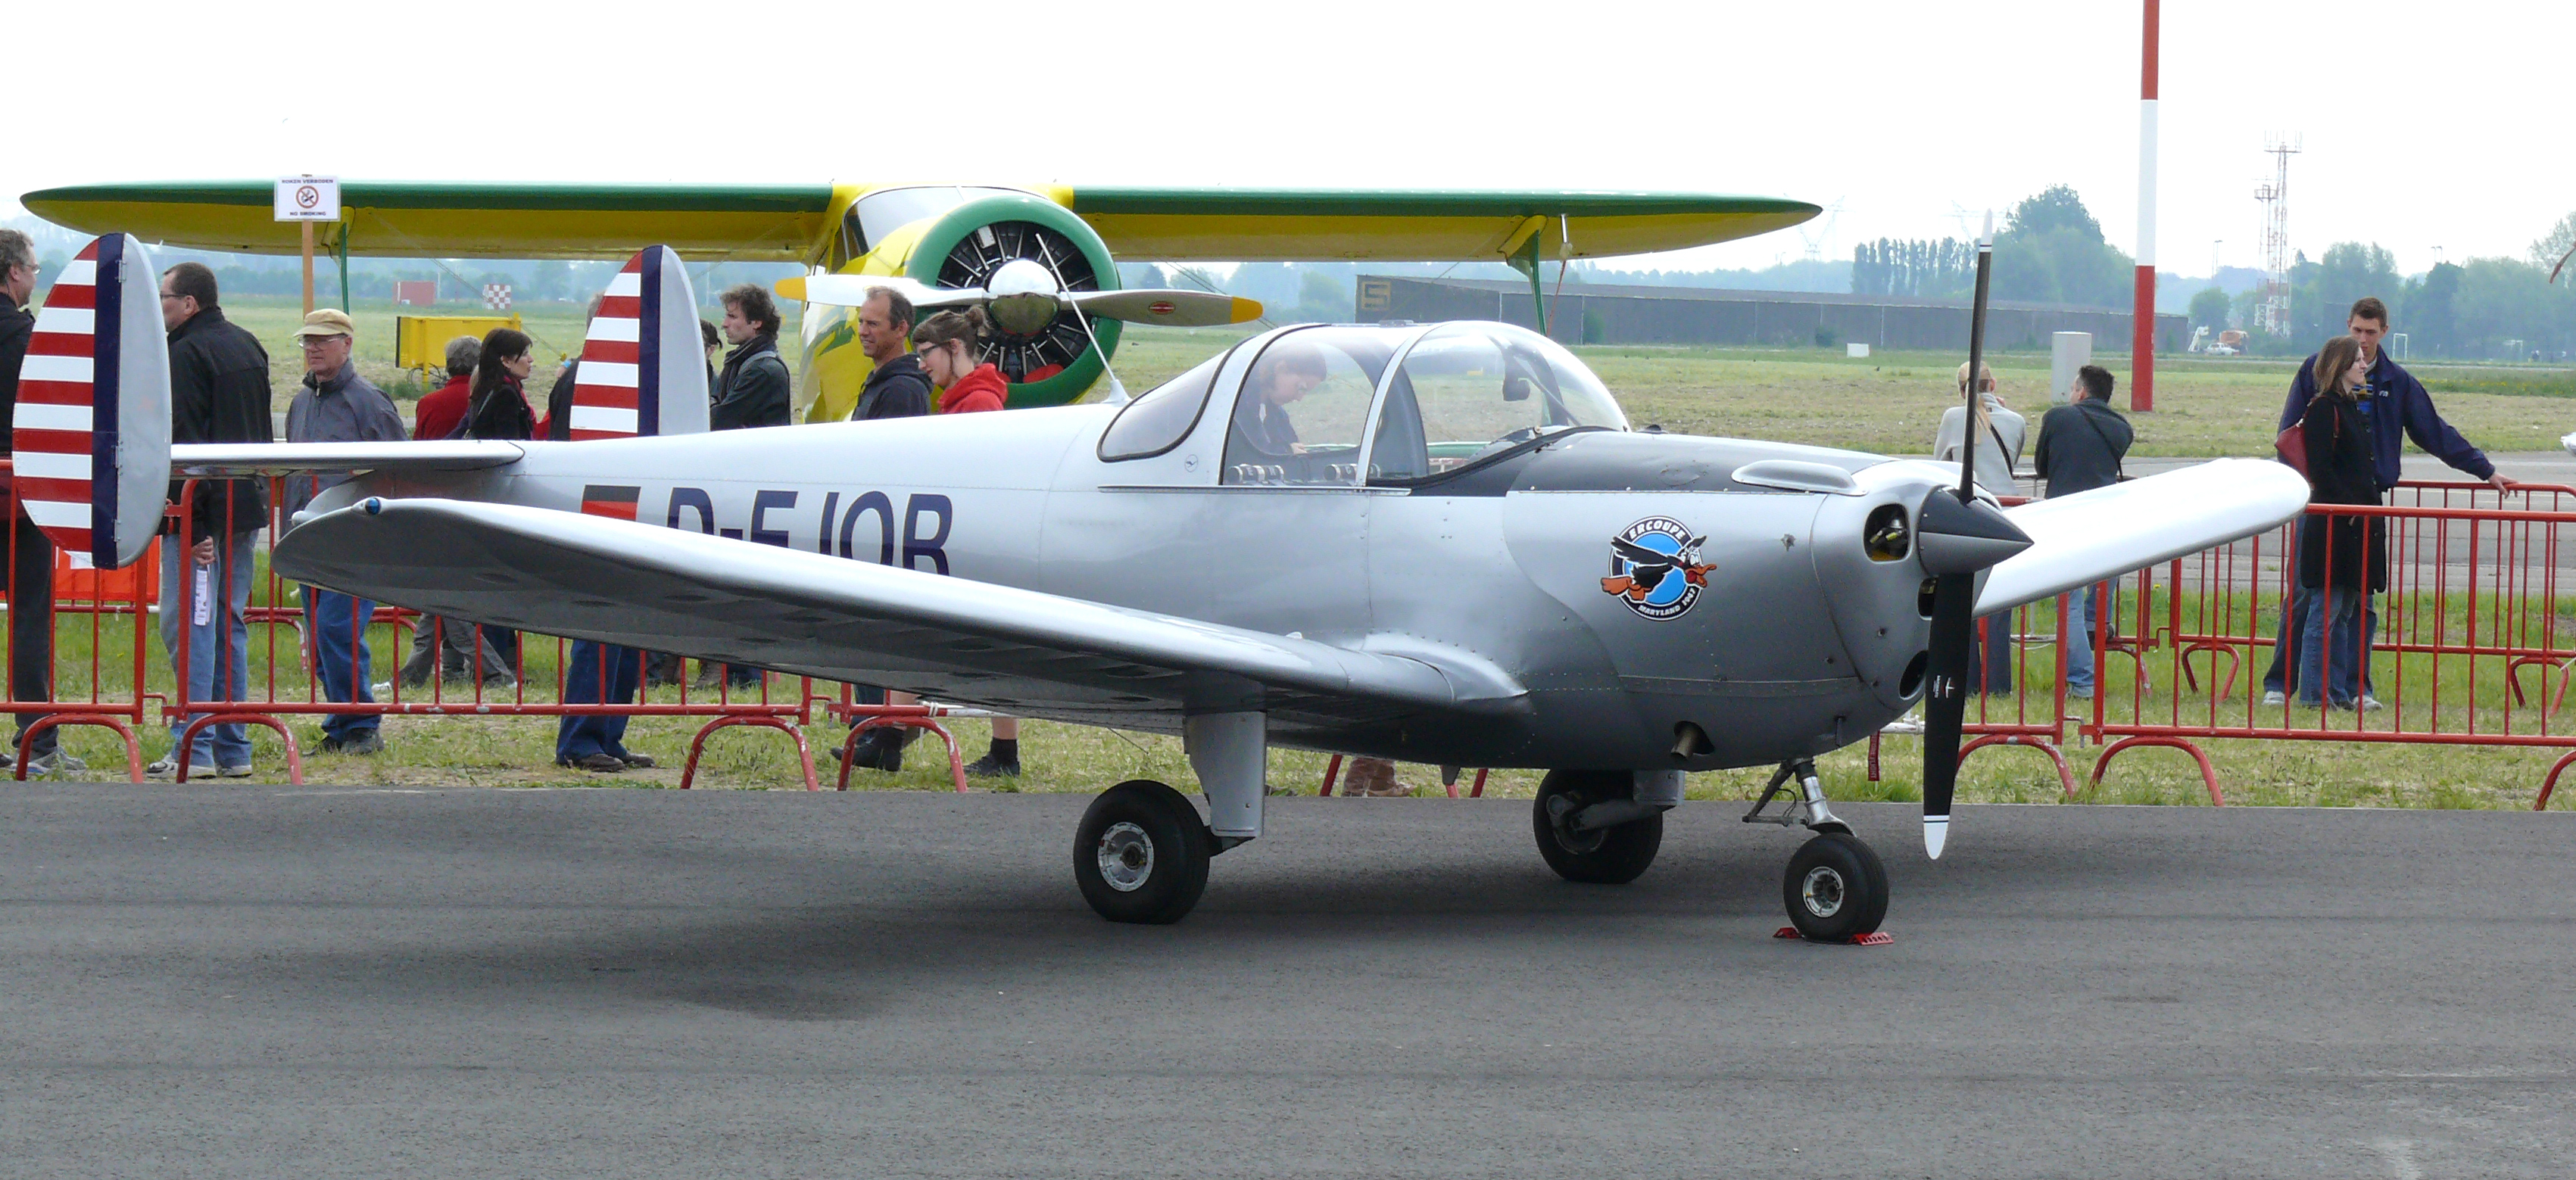 Erco Ercoupe and derivatives #1